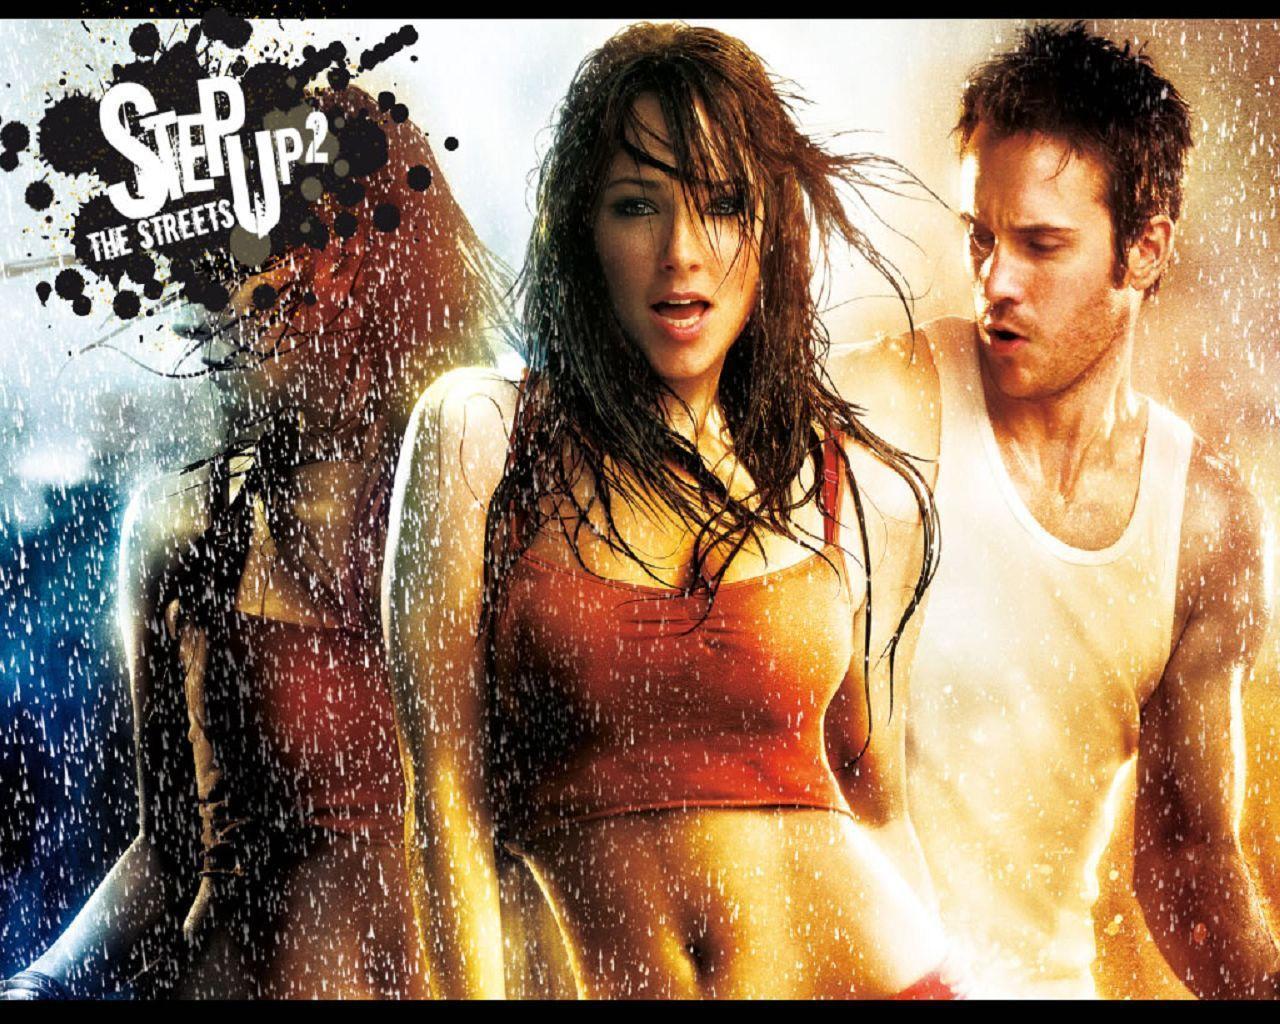 STEP UP 2. Step up. Cinema, Step up and Wallpaper